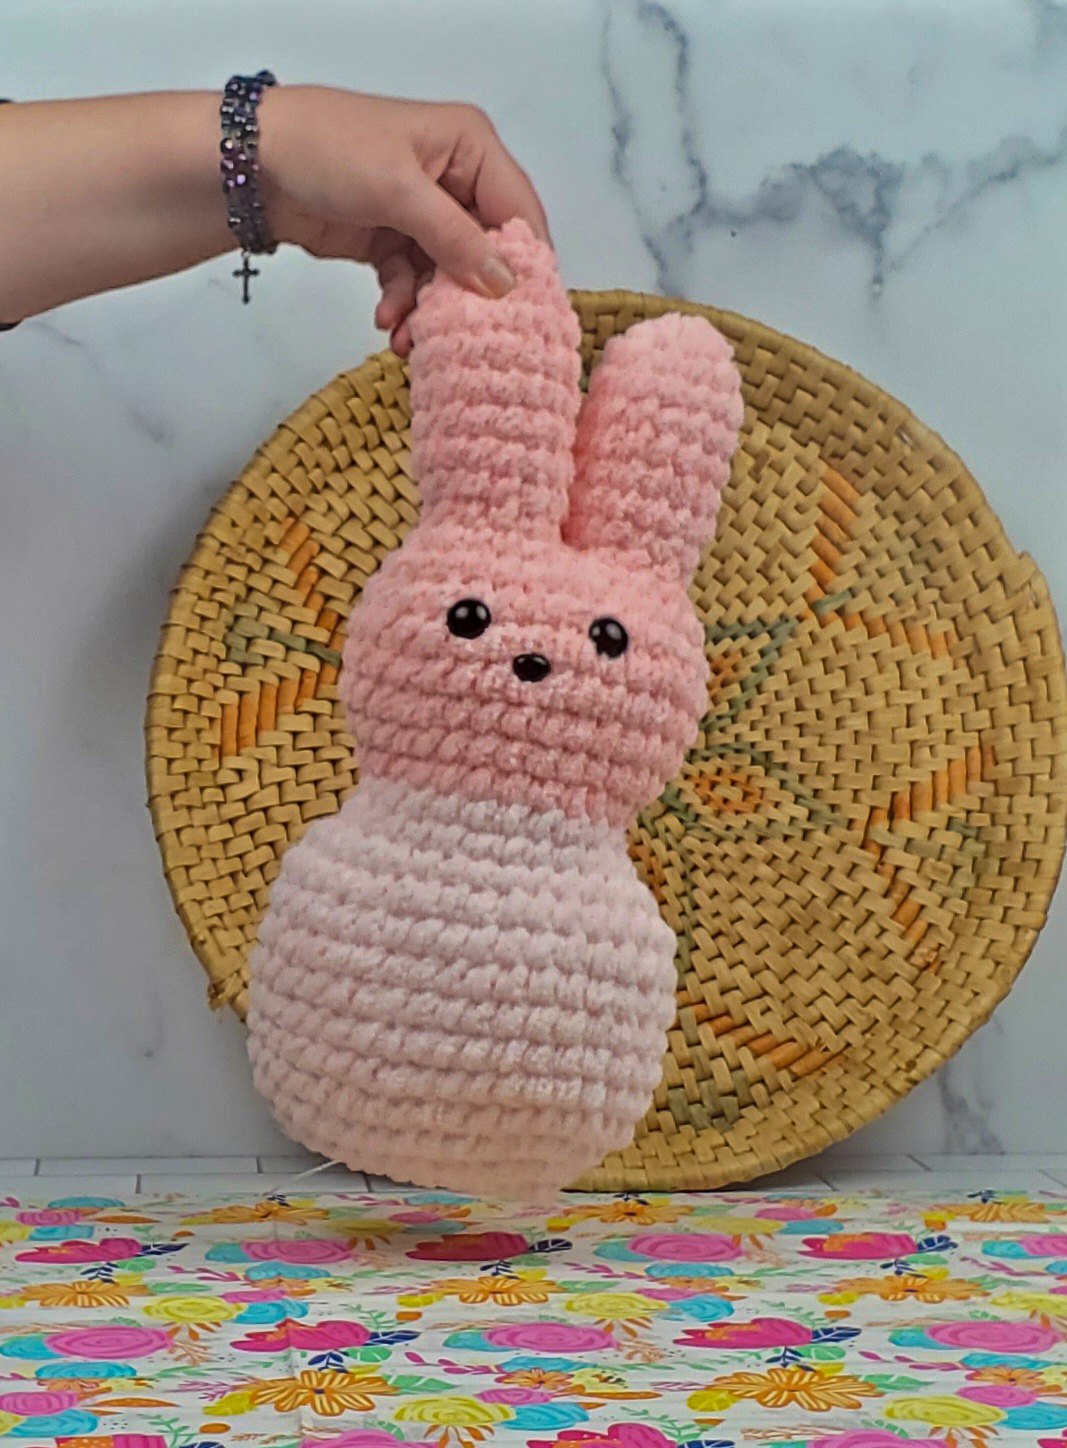 This Crochet Marshmello Bunny is made with love by 3ChickswithSticks! Shop more unique gift ideas today with Spots Initiatives, the best way to support creators.